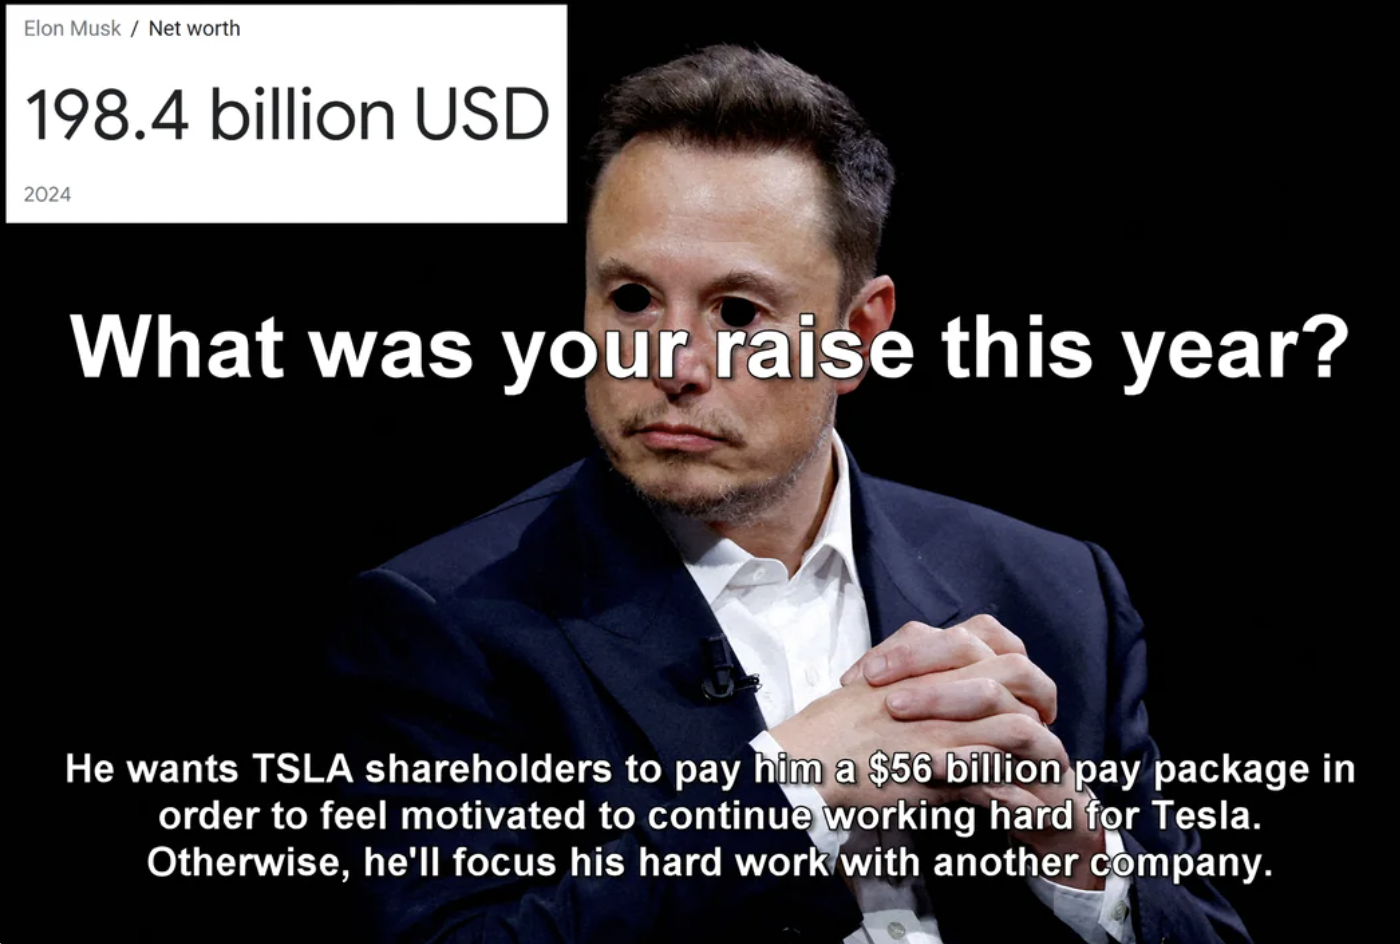 photo caption - Elon Musk Net worth 198.4 billion Usd 2024 What was your raise this year? He wants Tsla holders to pay him a $56 billion pay package in order to feel motivated to continue working hard for Tesla. Otherwise, he'll focus his hard work with a